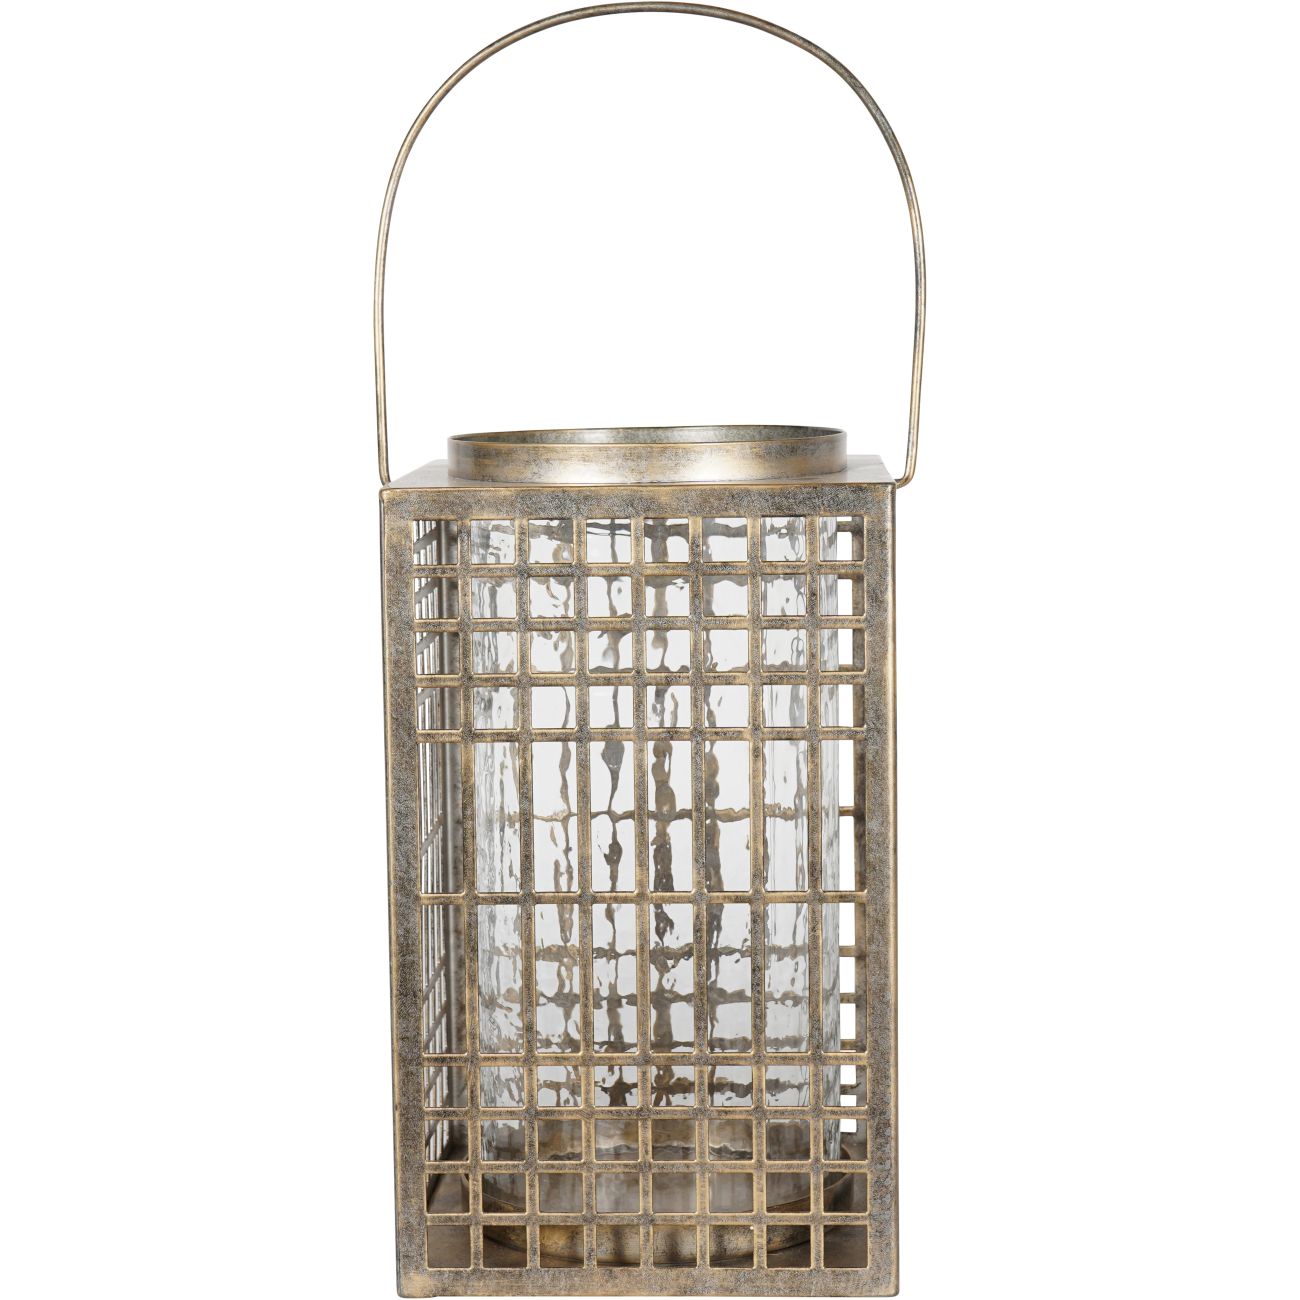 Fretwork Square Lantern in Aged Gold with Glass Flute 33cm